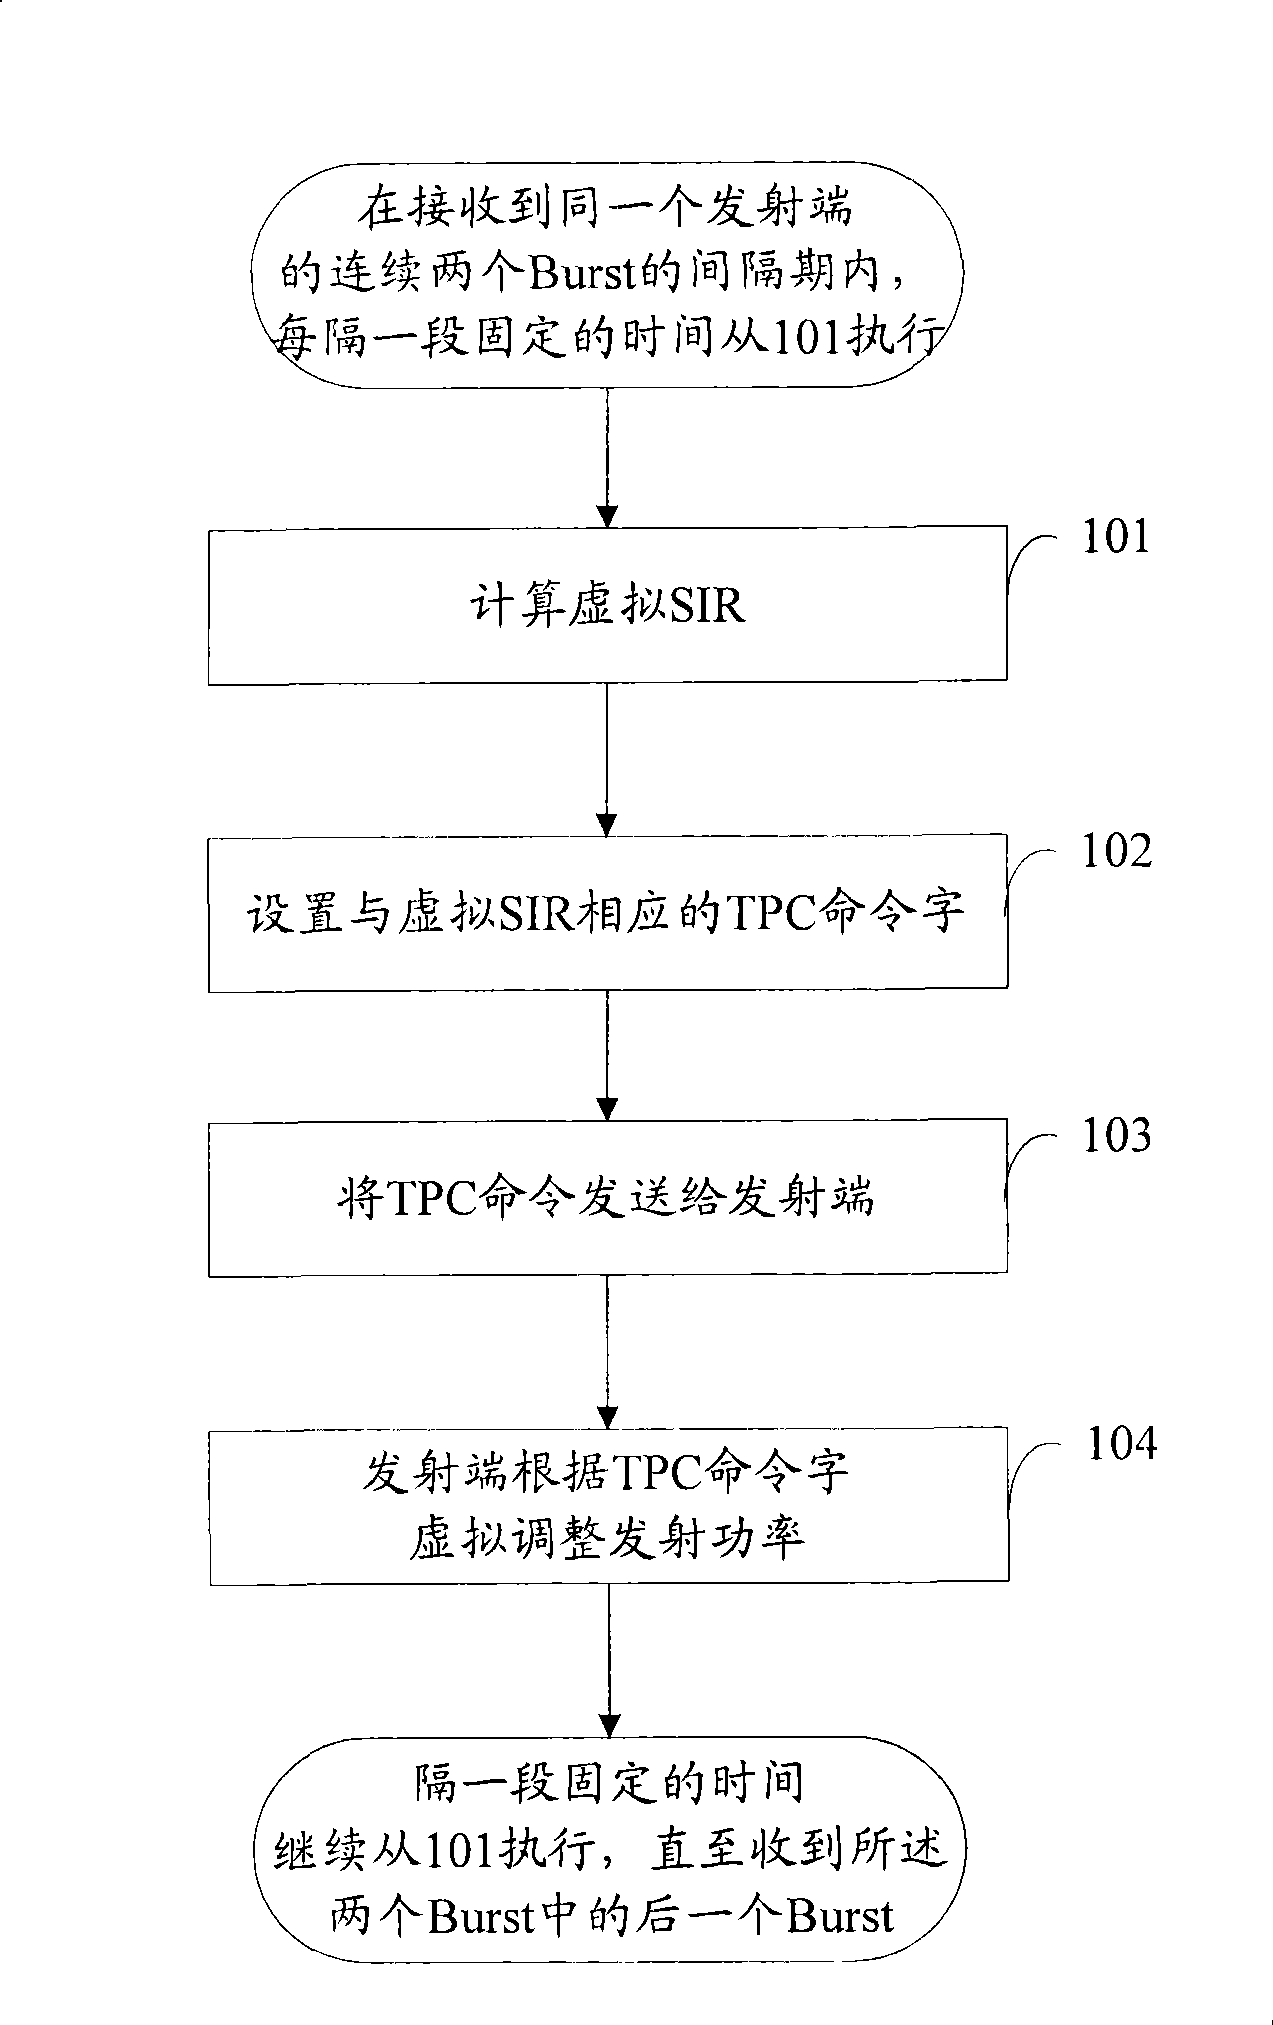 Virtual closed loop power control method used in uncontinuous transmission period